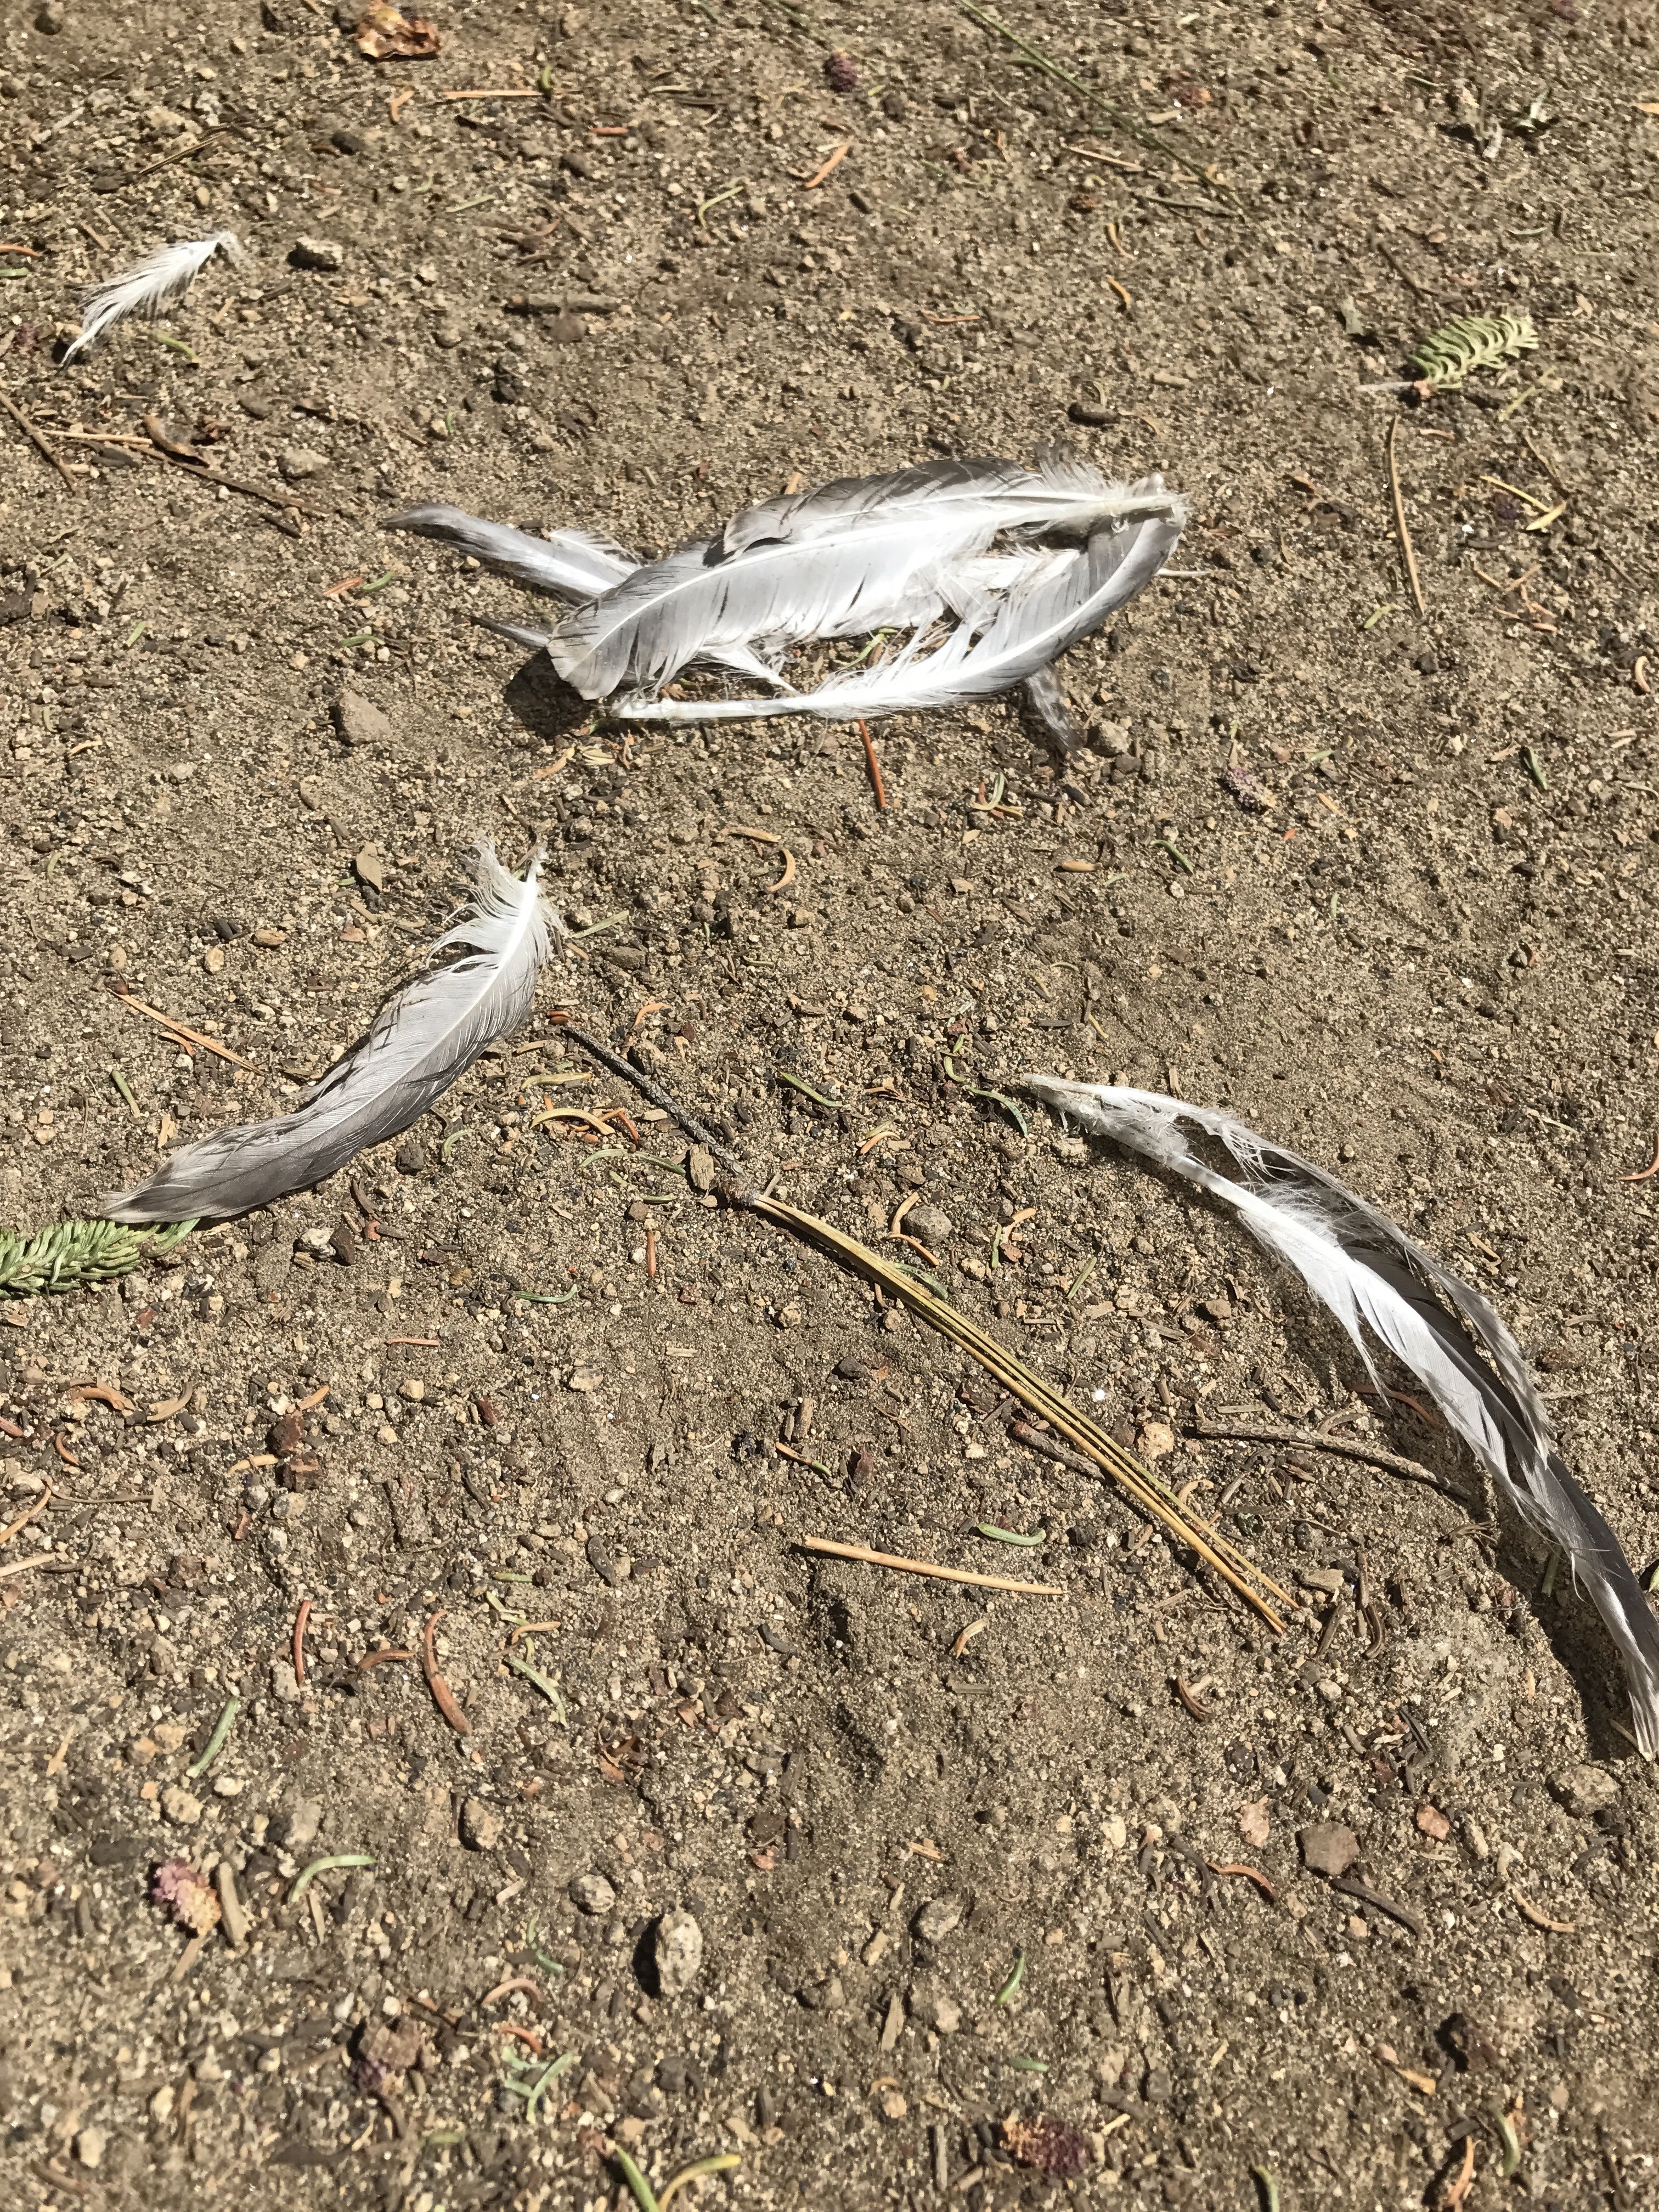 Perhaps a bird was turned into someone's lunch? 8/24/2017 Lake Tahoe